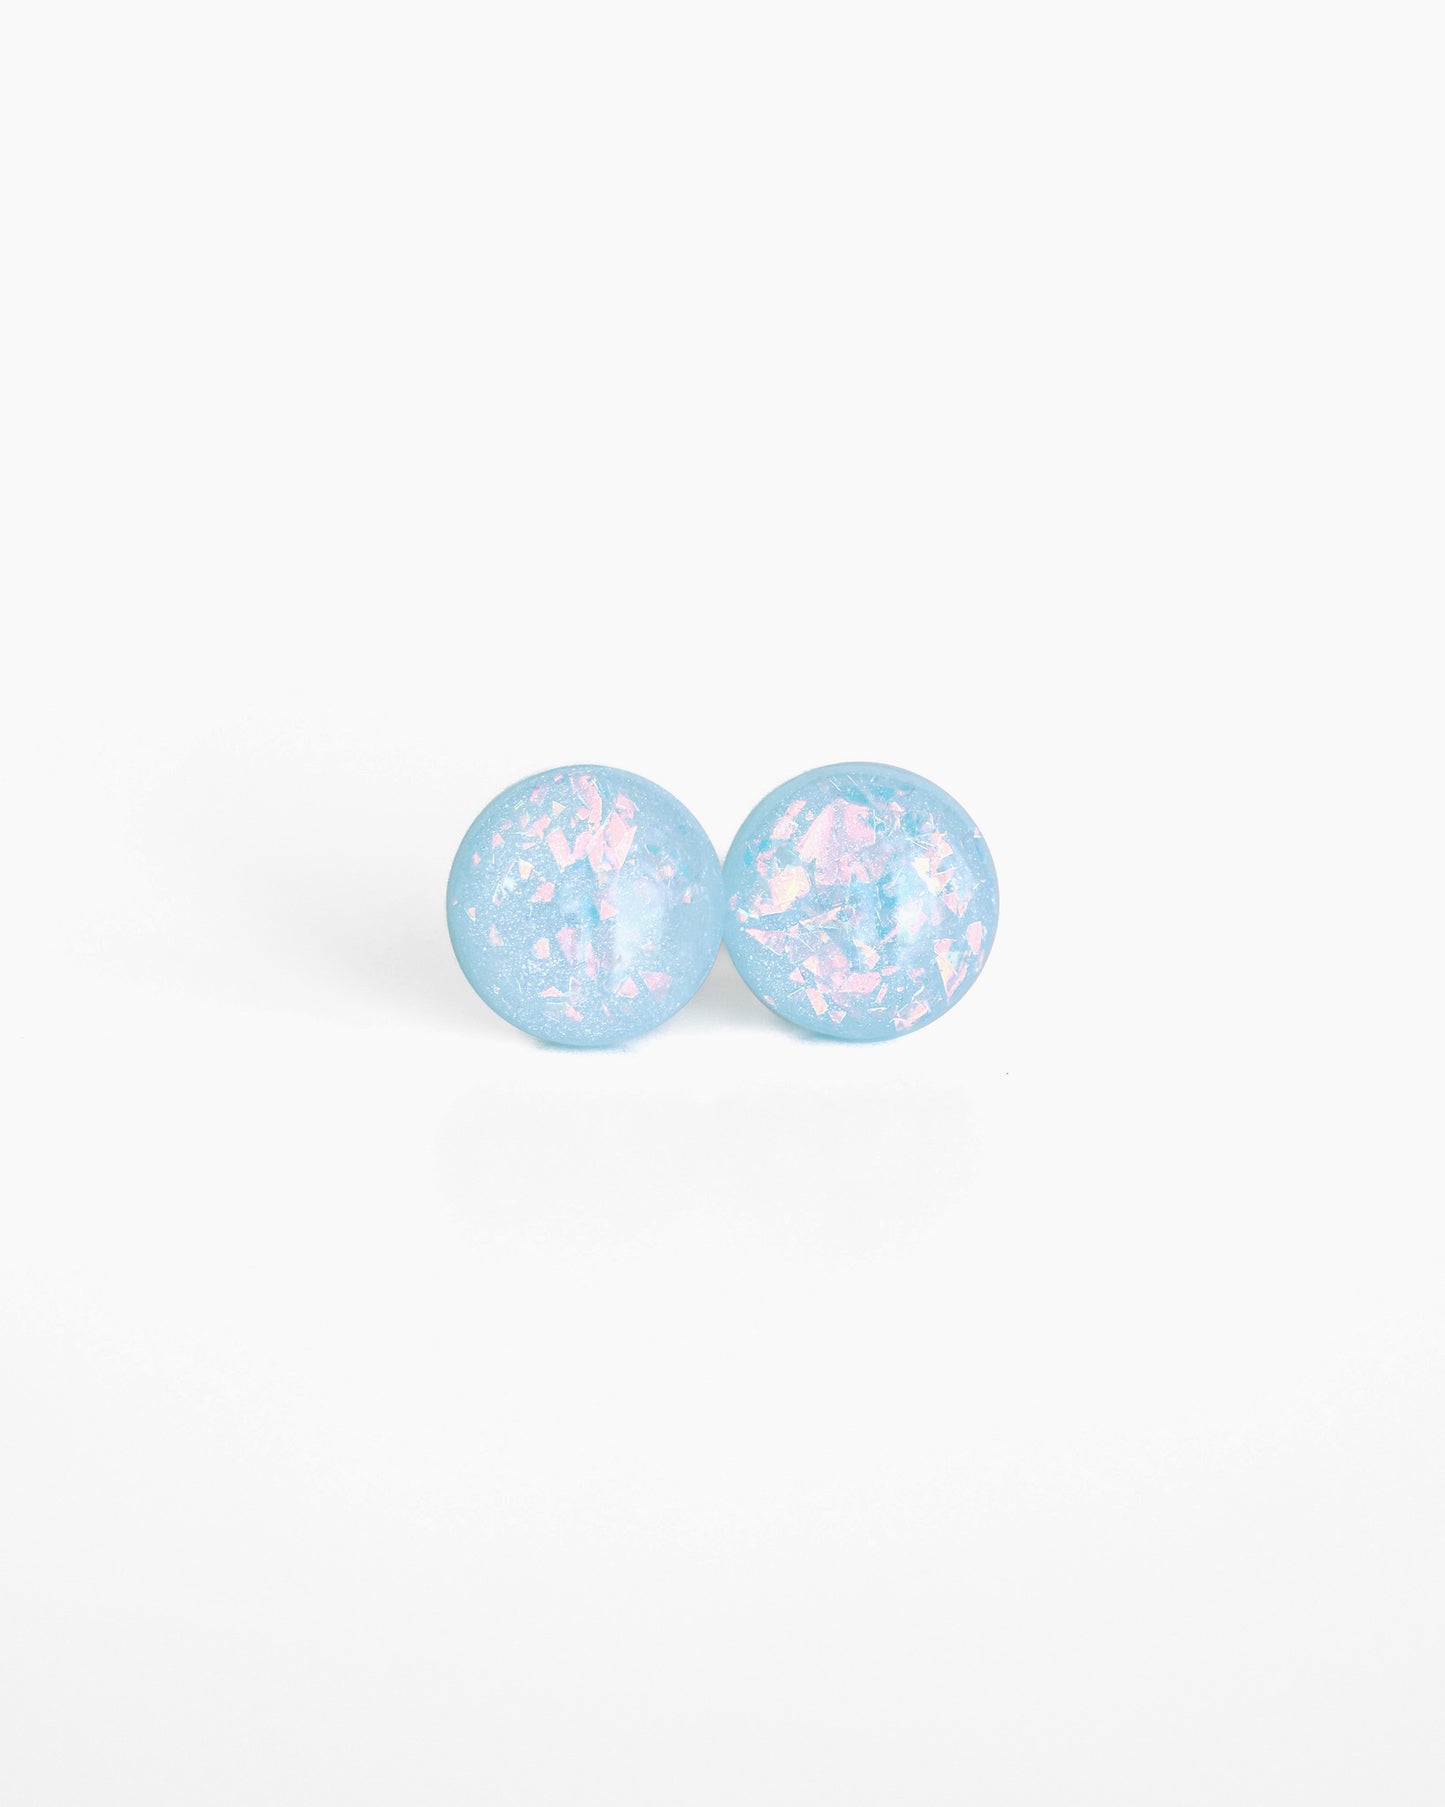 Sky blue sparkly stud earrings with surgical steel posts